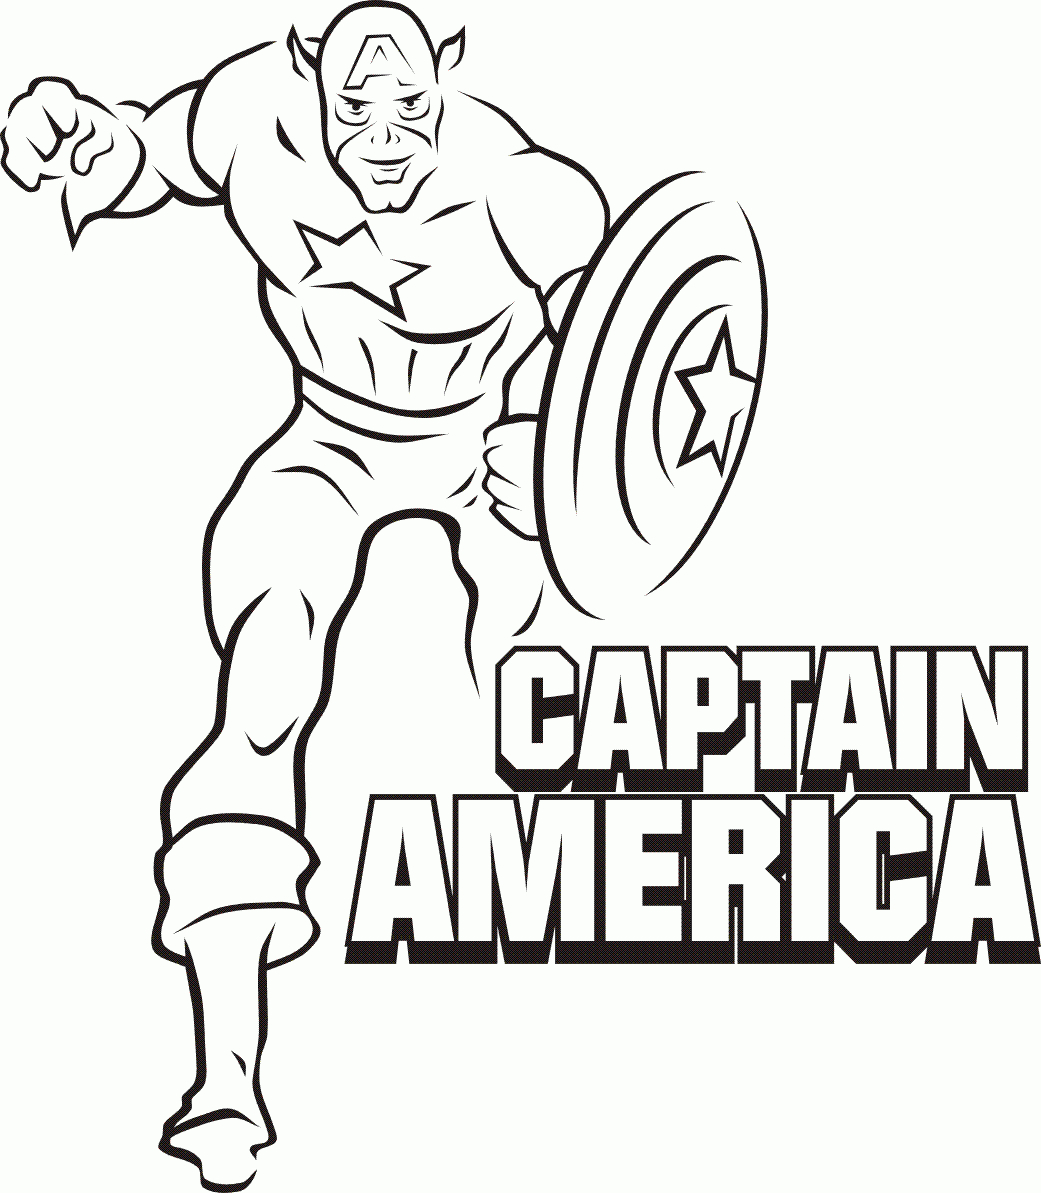 Superhero Coloring Pages To Download And Print For Free | Color - Free Printable Superhero Coloring Pages